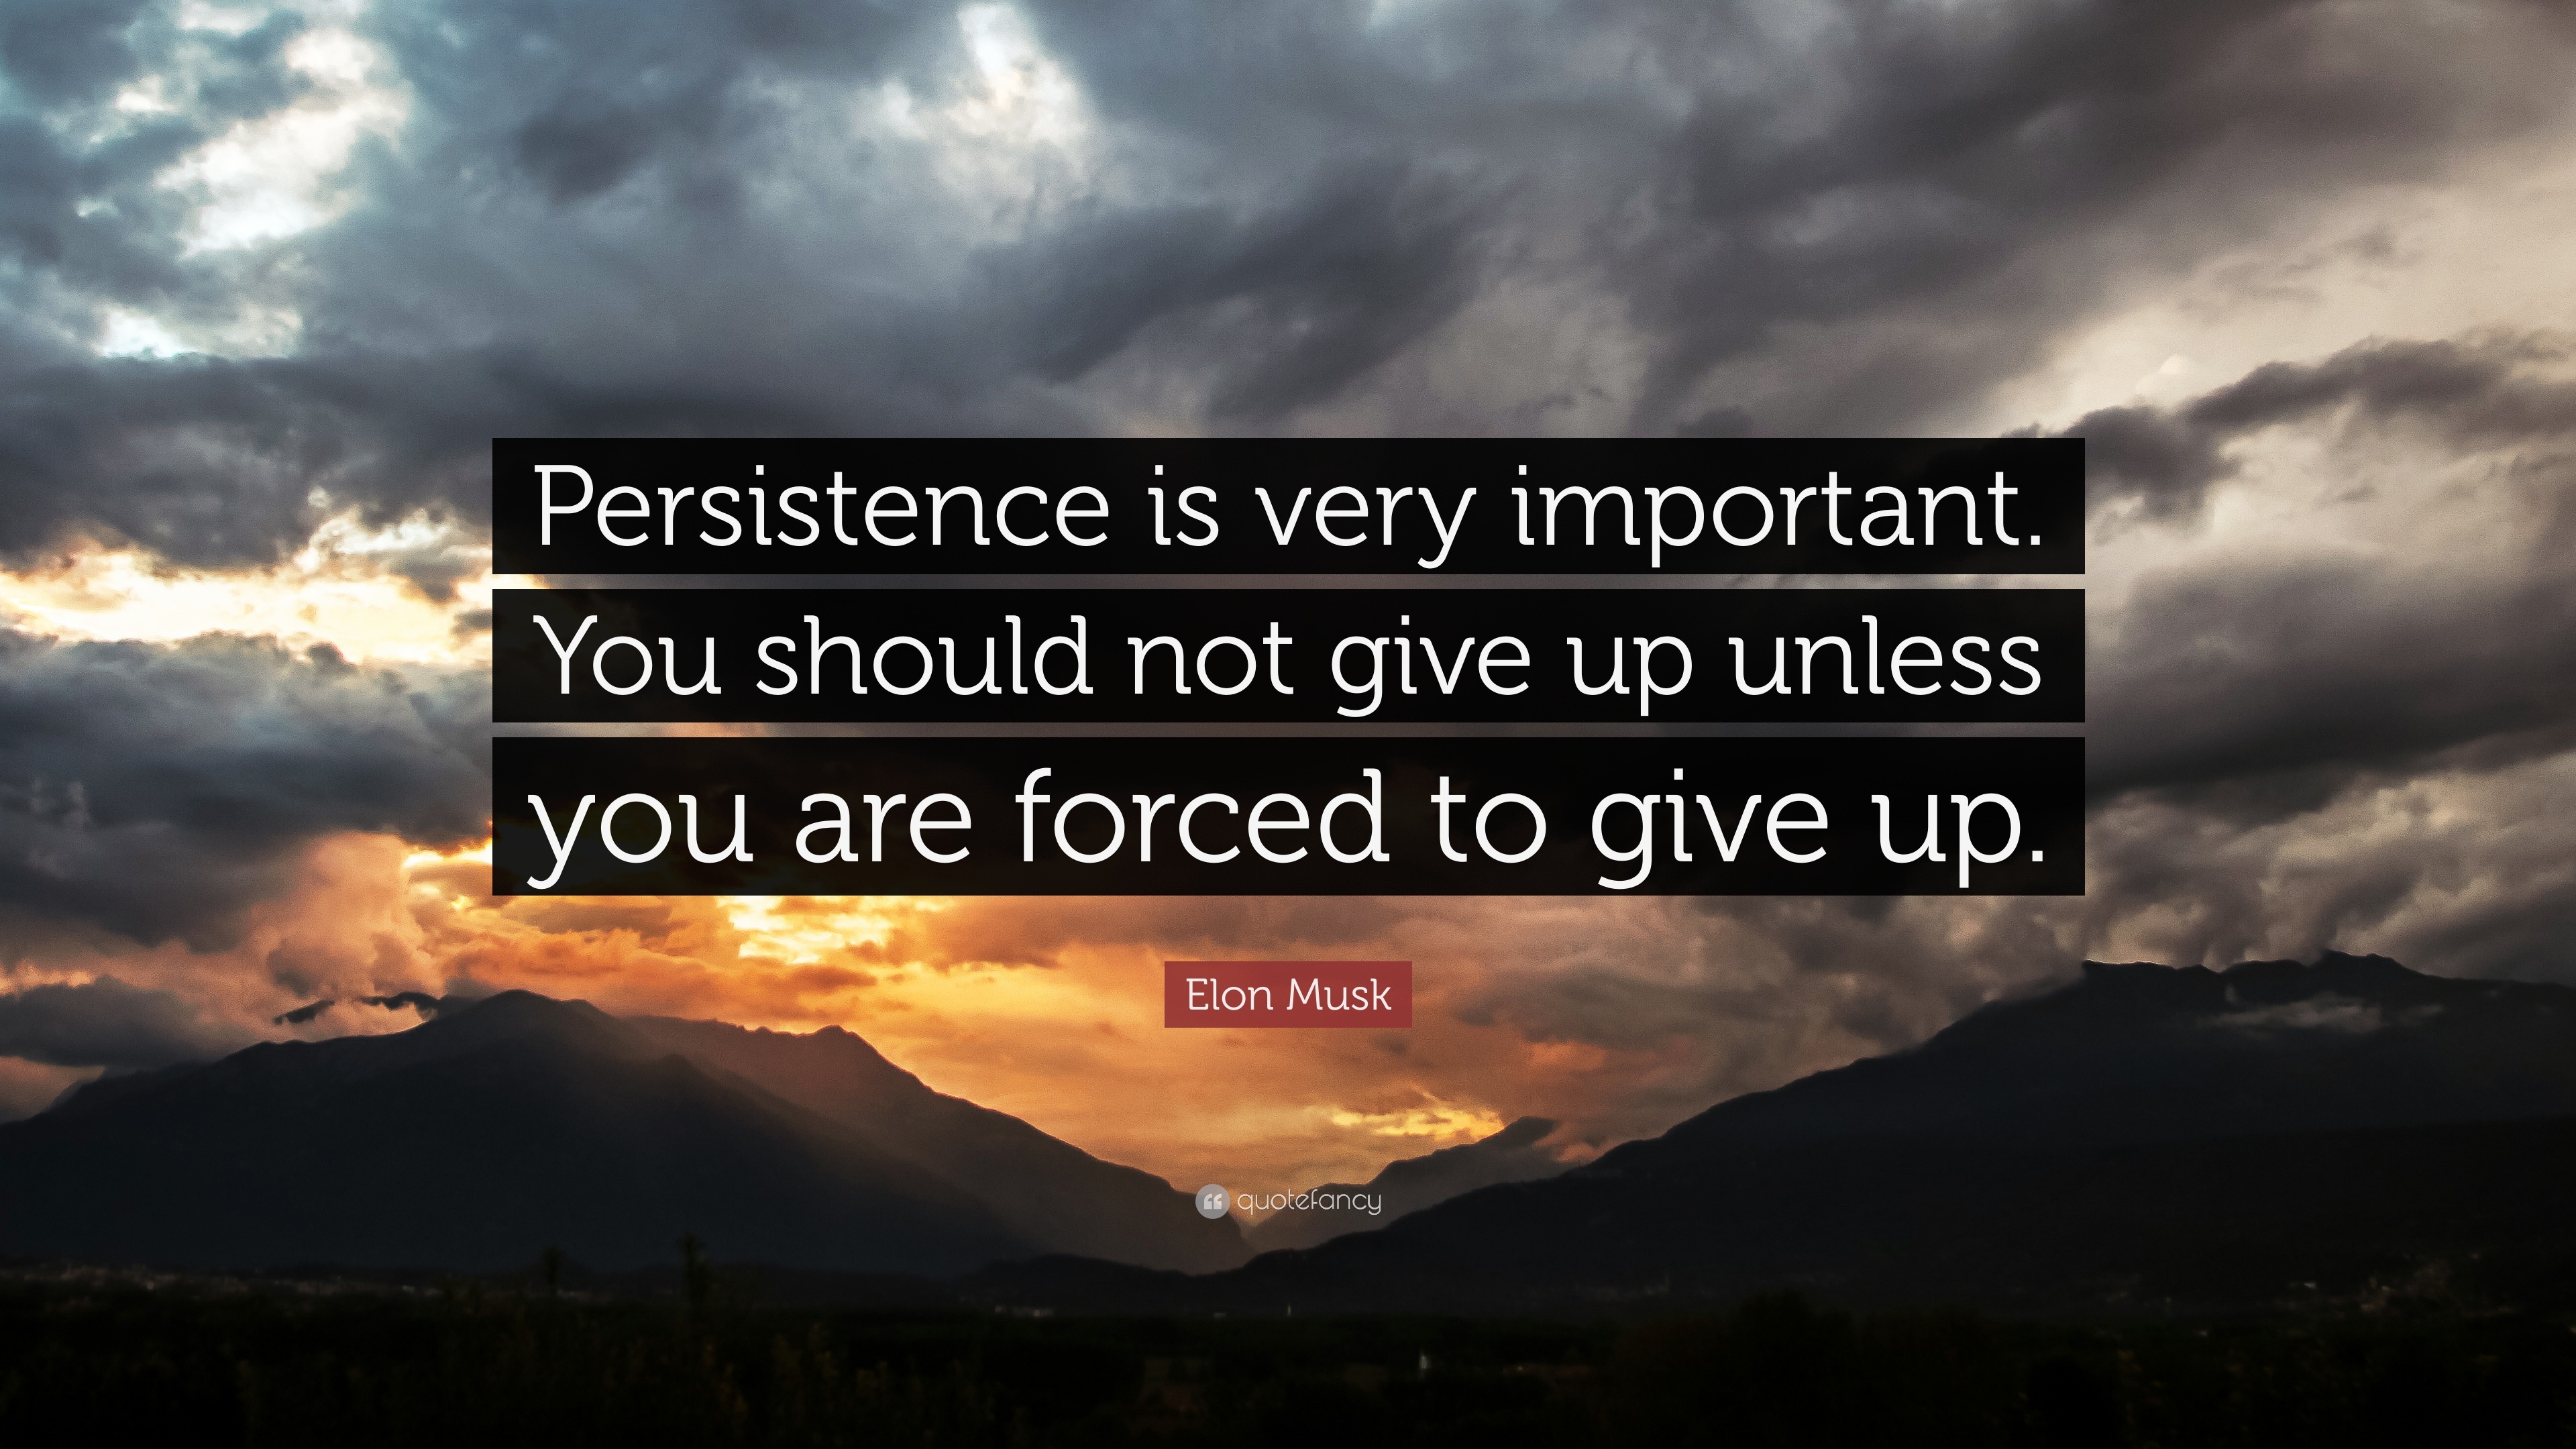 Persistence Quotes (28 wallpapers) - Quotefancy